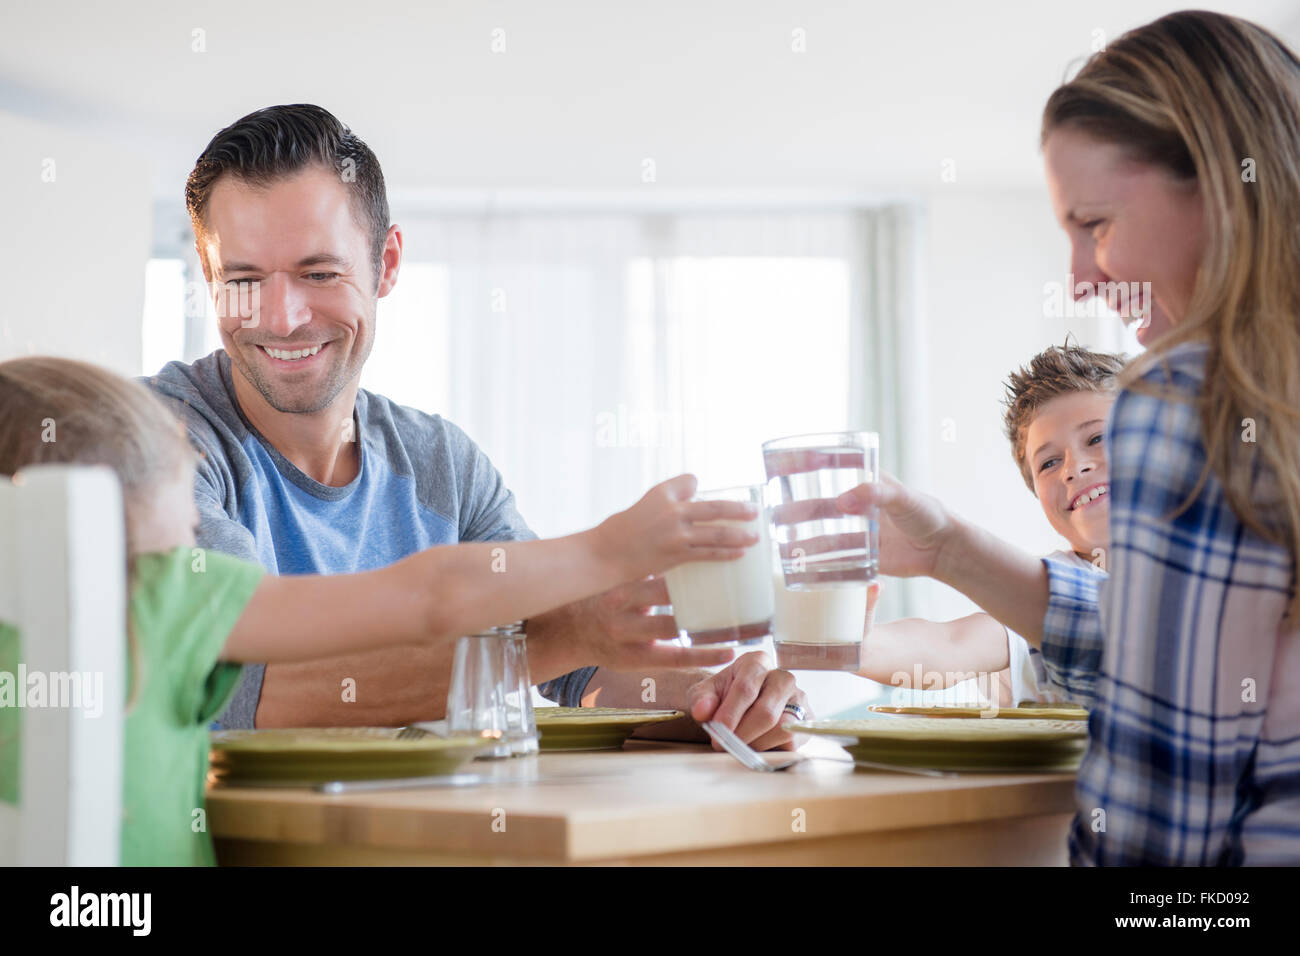 Family with two children (6-7, 8-9) making a toast Stock Photo